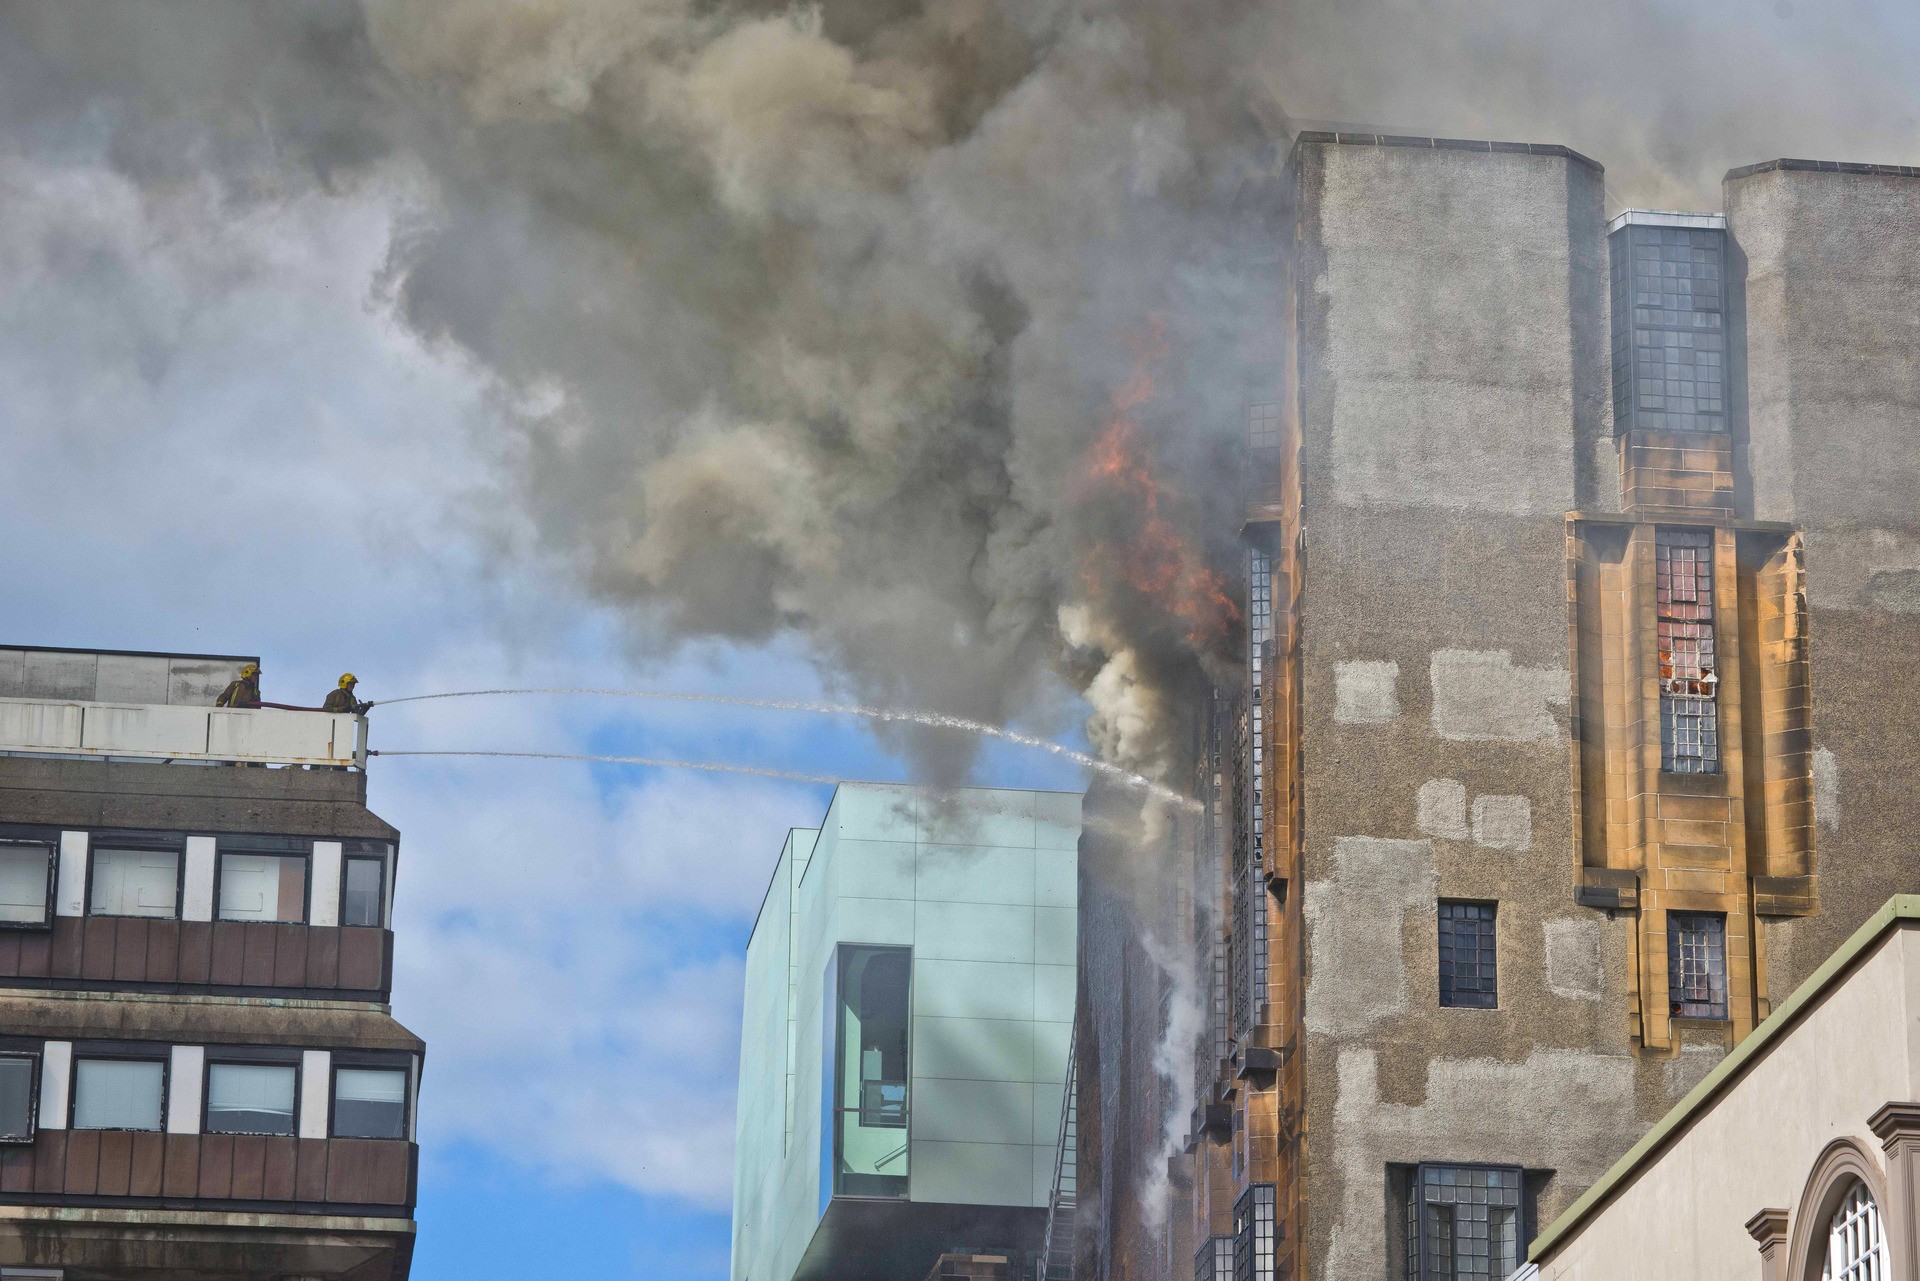 GLASGOW, SCOTLAND - MAY 23:  Fire crews tackle a fire at the Glasgow School of Art Charles Rennie Mackintosh Building on May 23, 2014 